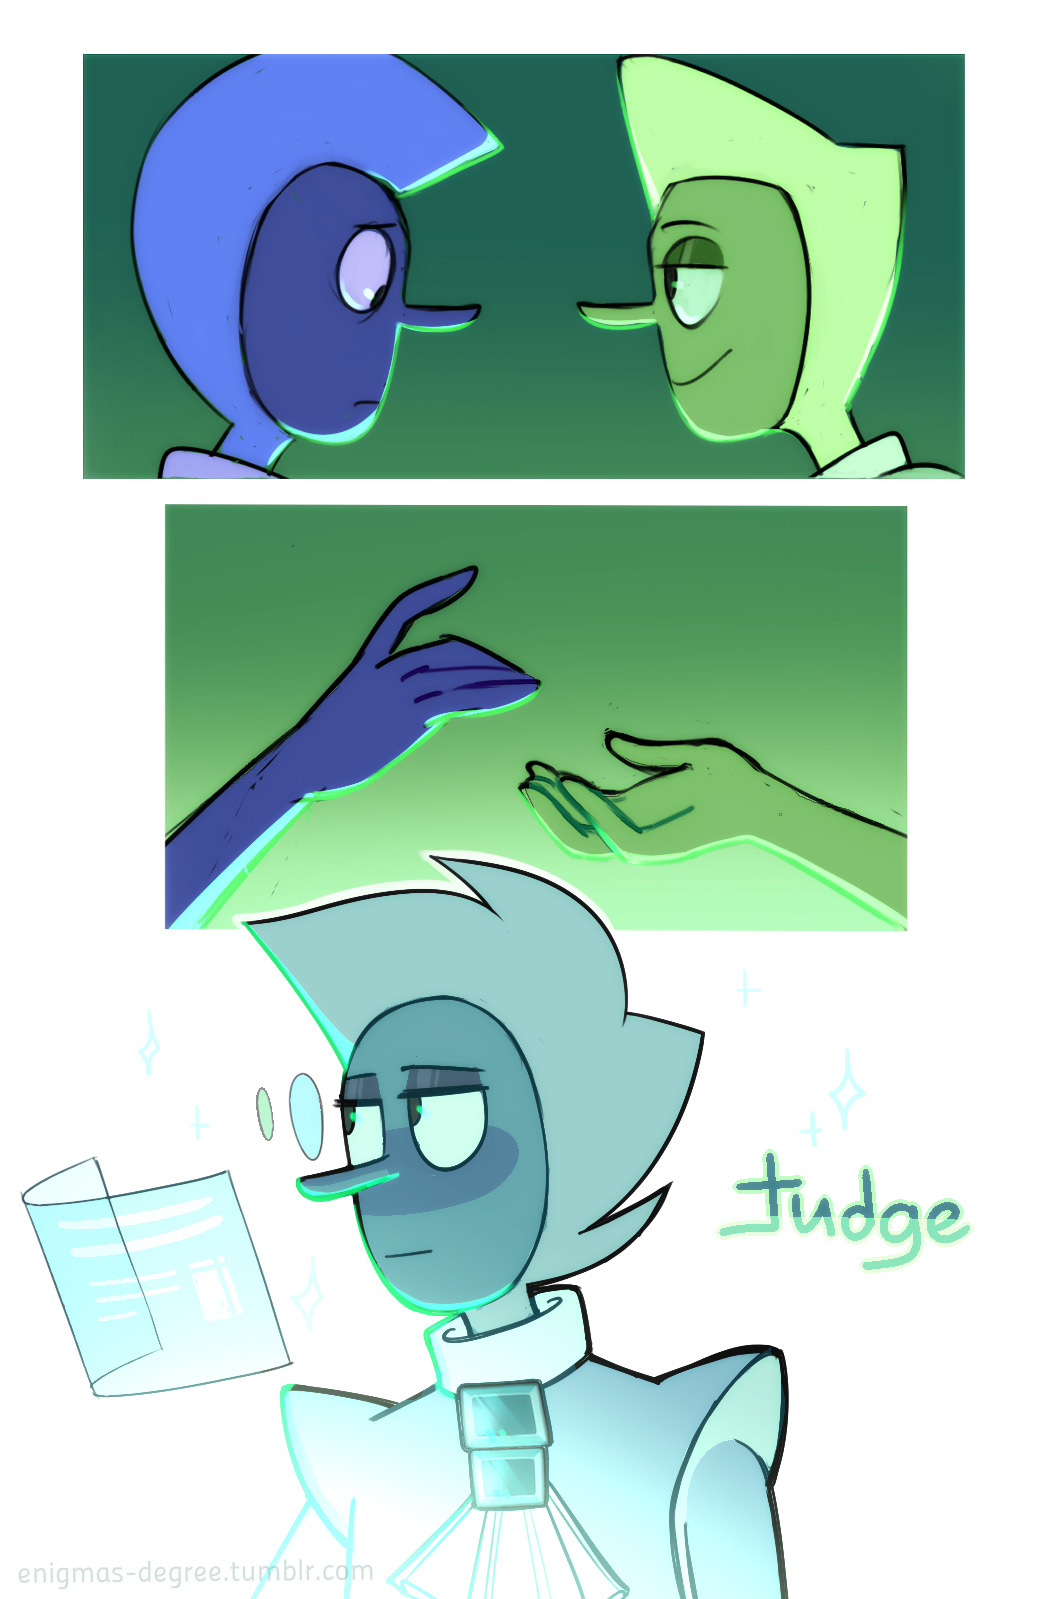 AU where Prosecuting Zircon and Defending Zircon fuse to make a final judgment